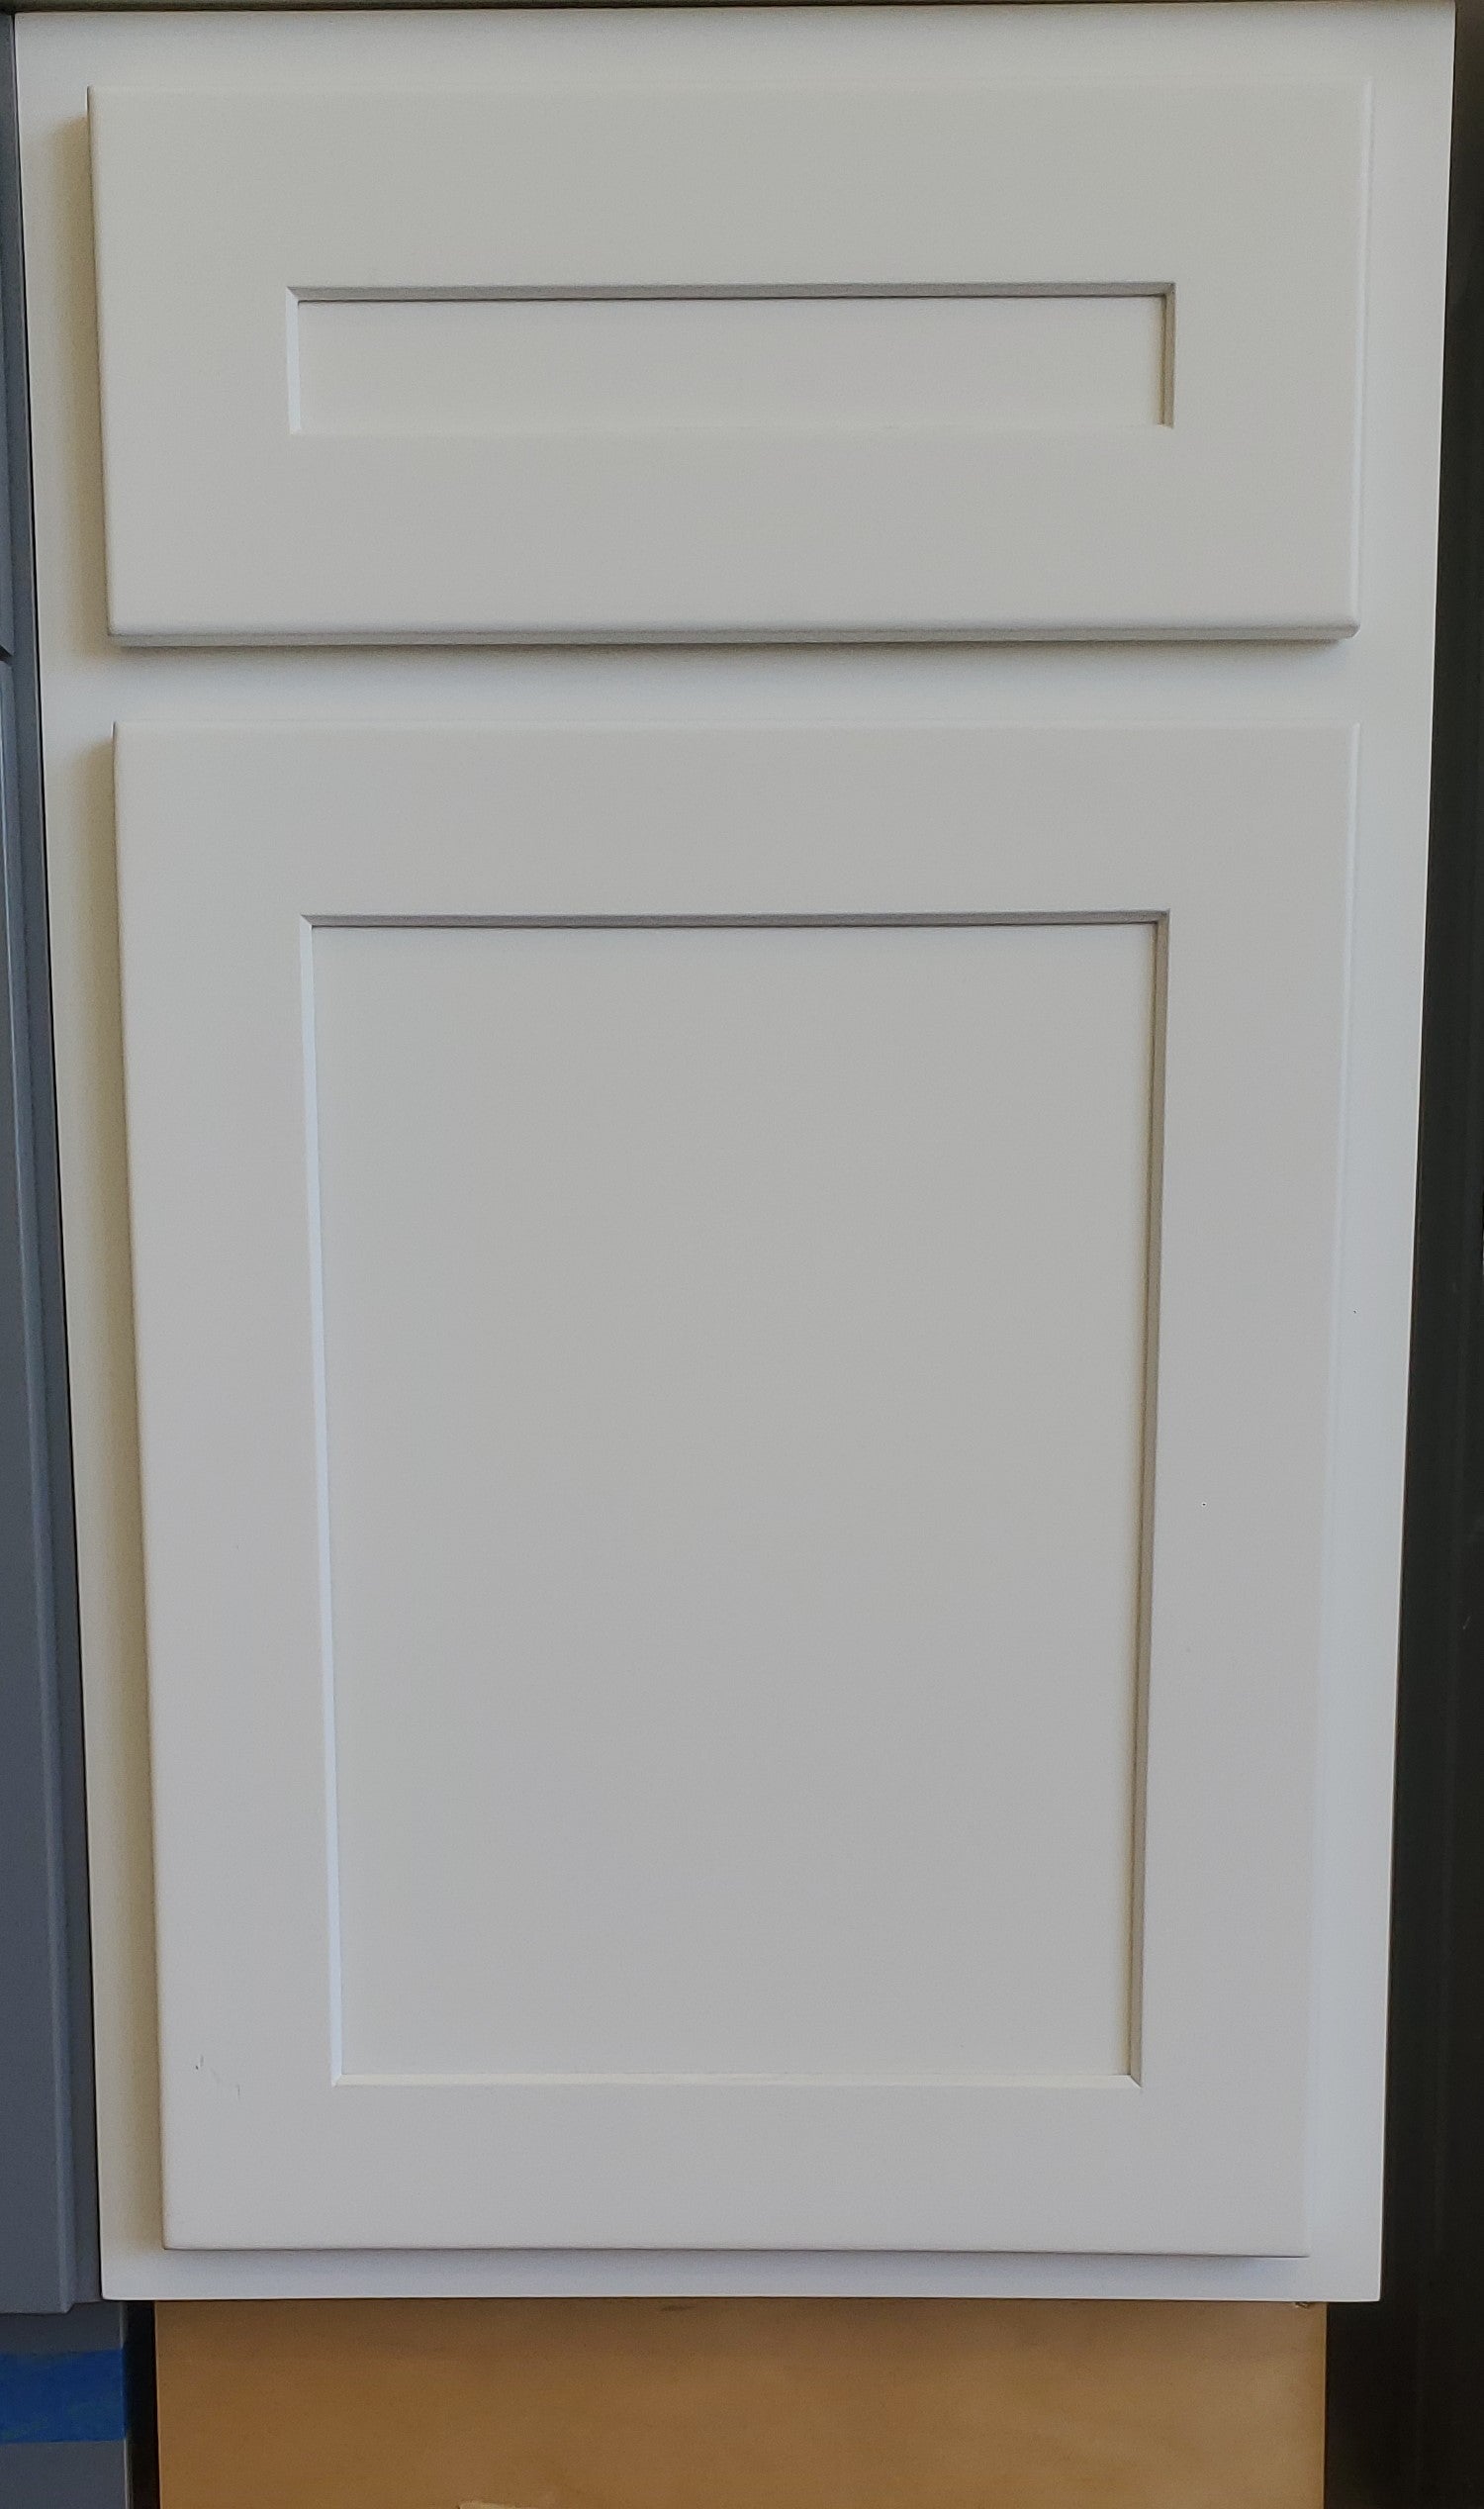 36" Wide by 12" Deep Bridge White Shaker 1/2" Overlay Wall Cabinet - Double Door 12", 15", 18", 21", 24" Tall